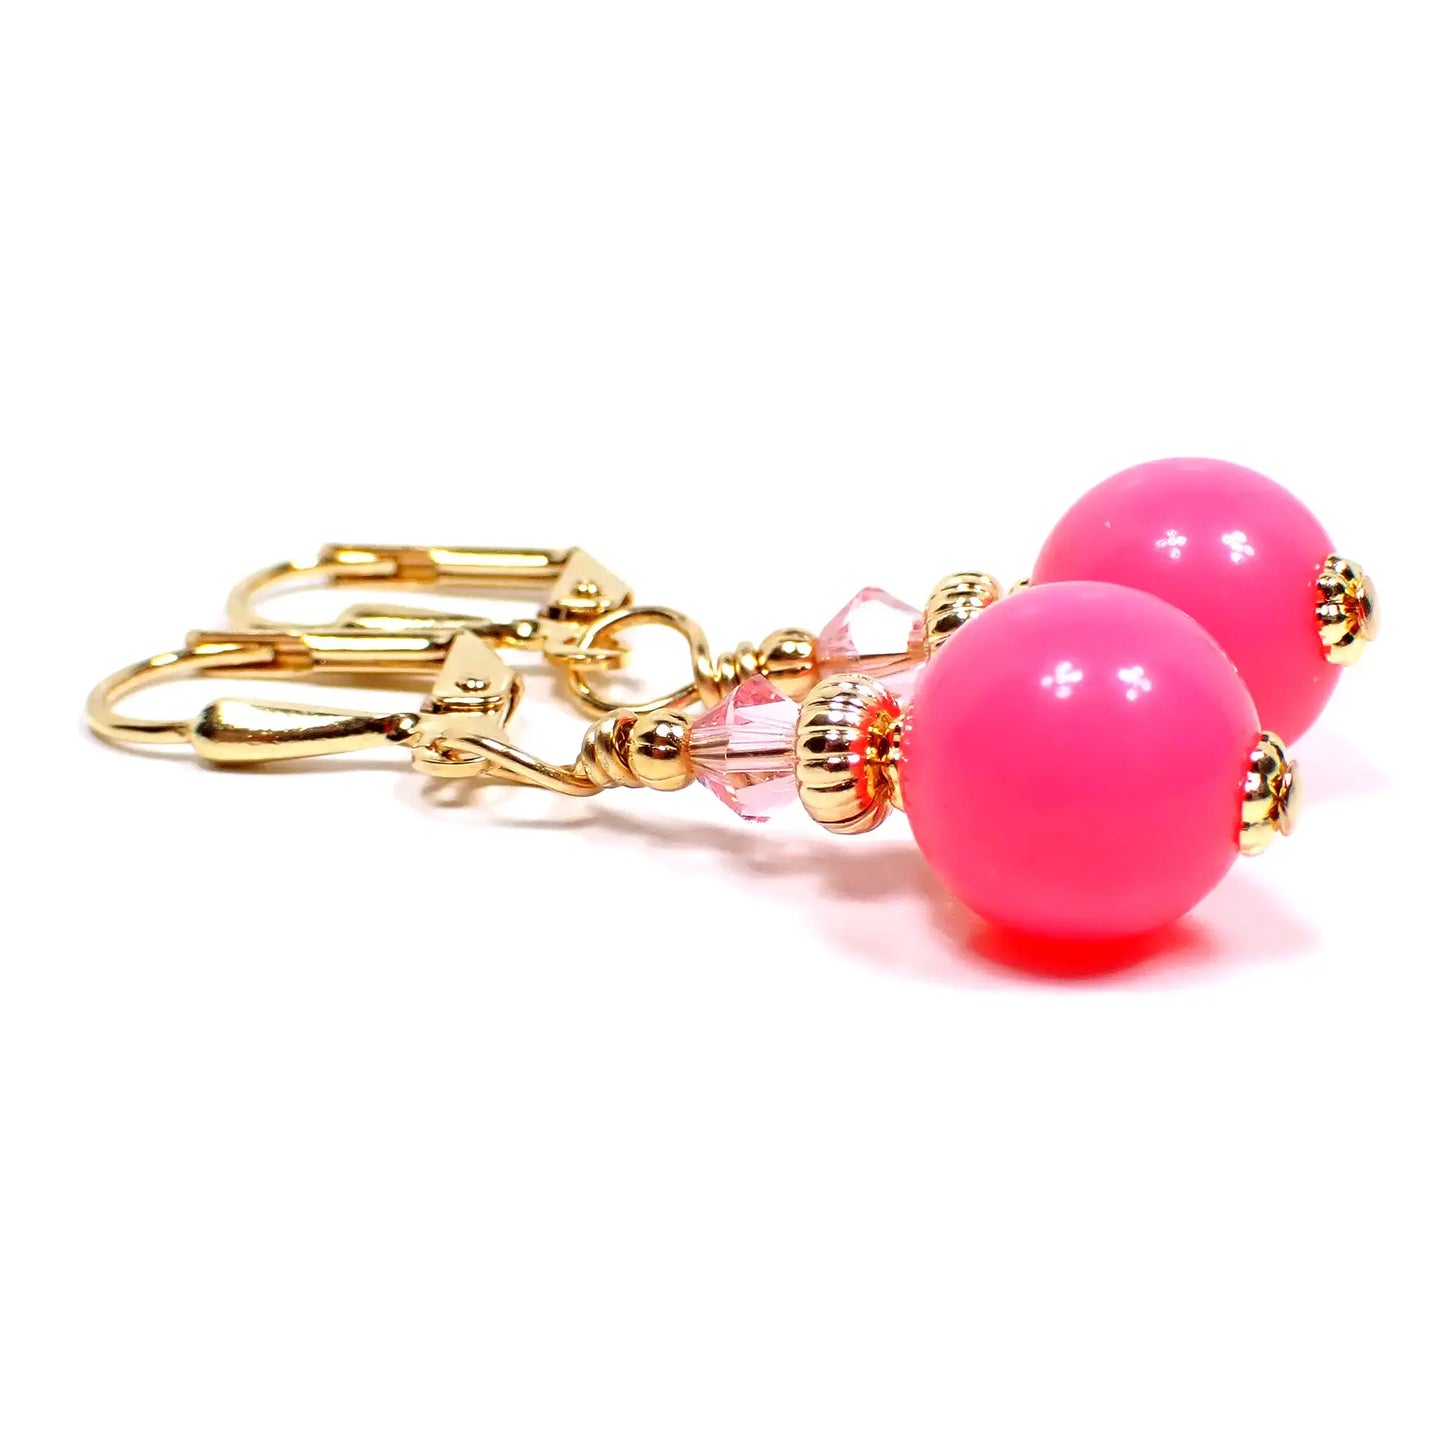 Top view of the handmade small drop earrings with vintage acrylic beads. The metal is gold plated in color. There is a faceted glass crystal bead in light pink at the top. The bottom acrylic beads are round ball shaped and are bright pink in color.